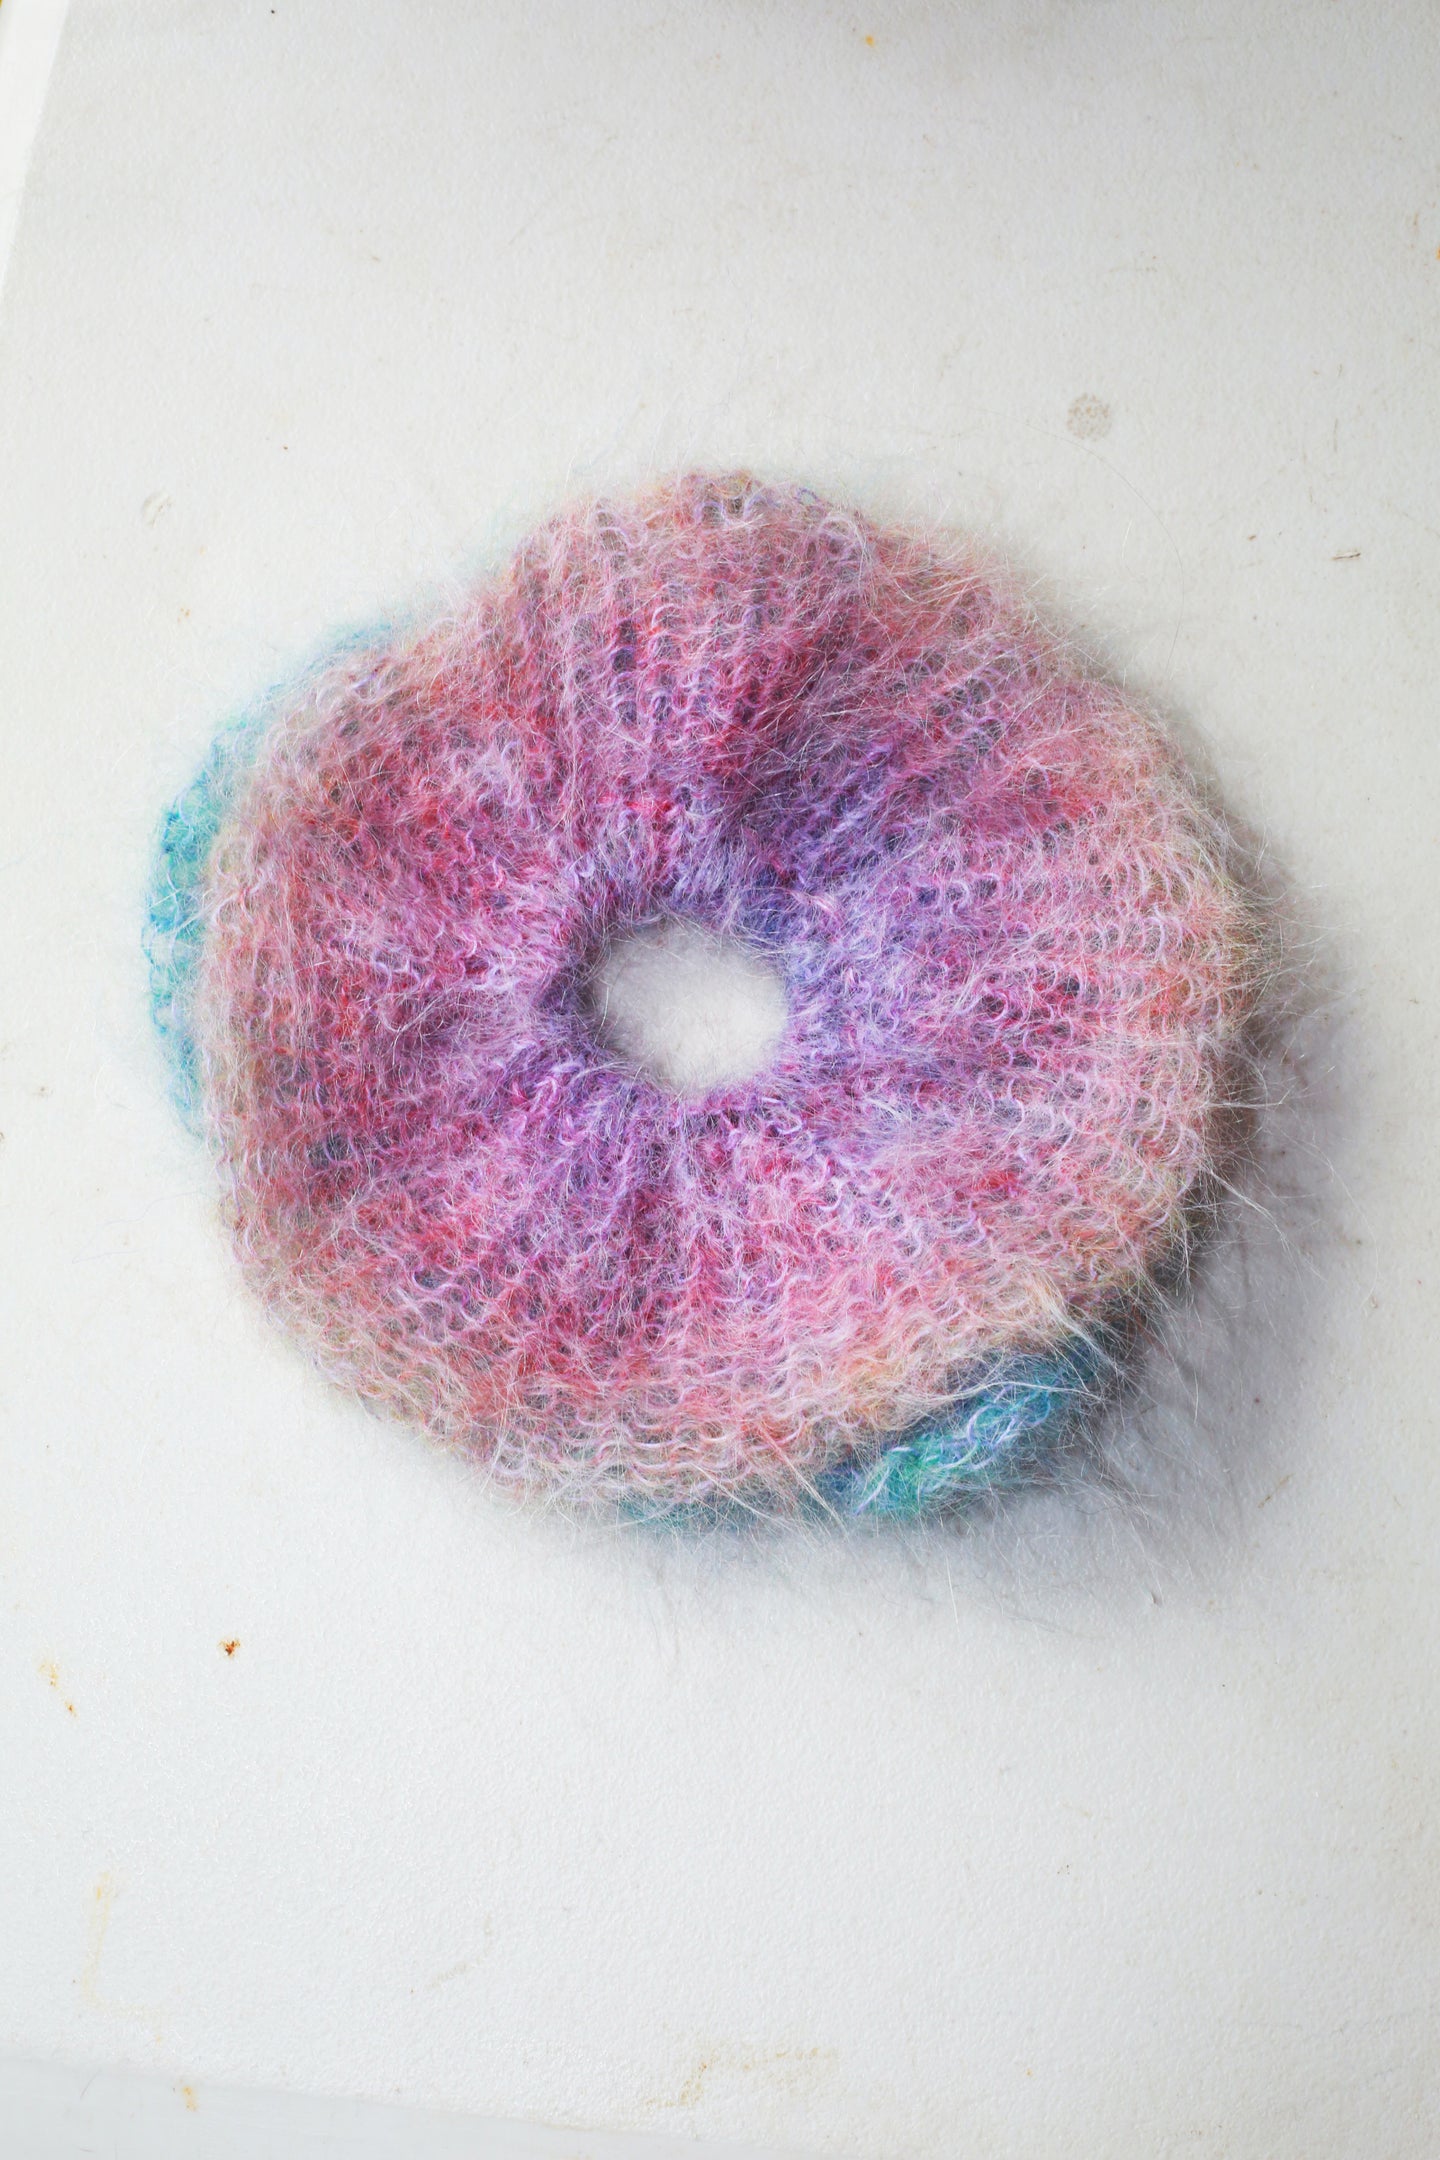 DOUBLE LAYERED MOHAIR SCRUNCHIE - BLUES, PINKS & PURPLES